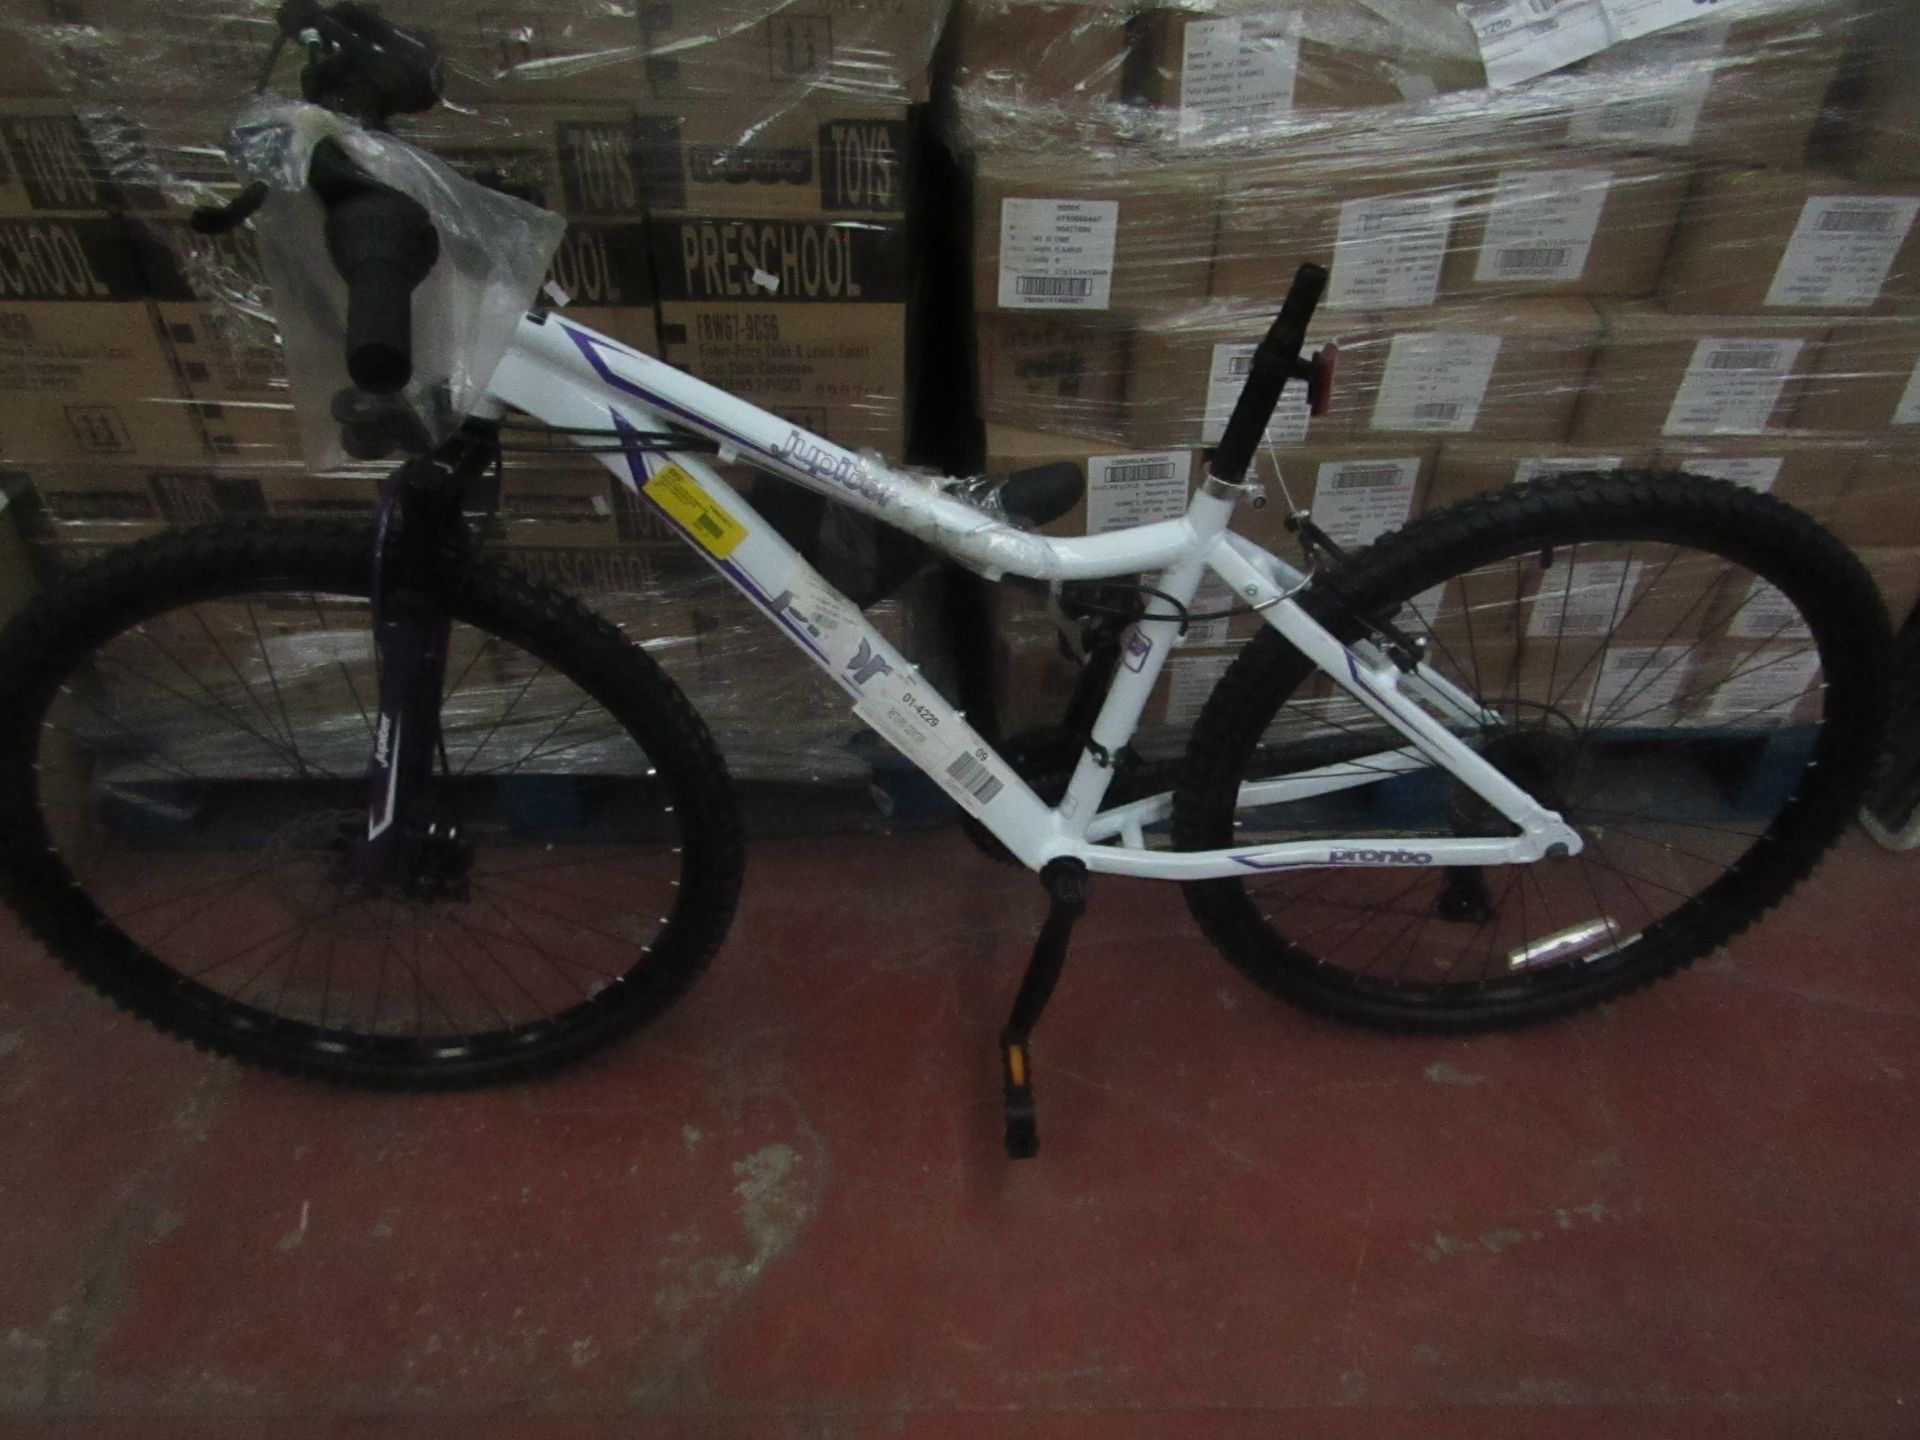 | 1X | PRONTO 26" ALLOY FRAME FRONT SUSPENSION MOUNTAIN BIKE, FEMALE | UNCHECKED | NO ONLINE